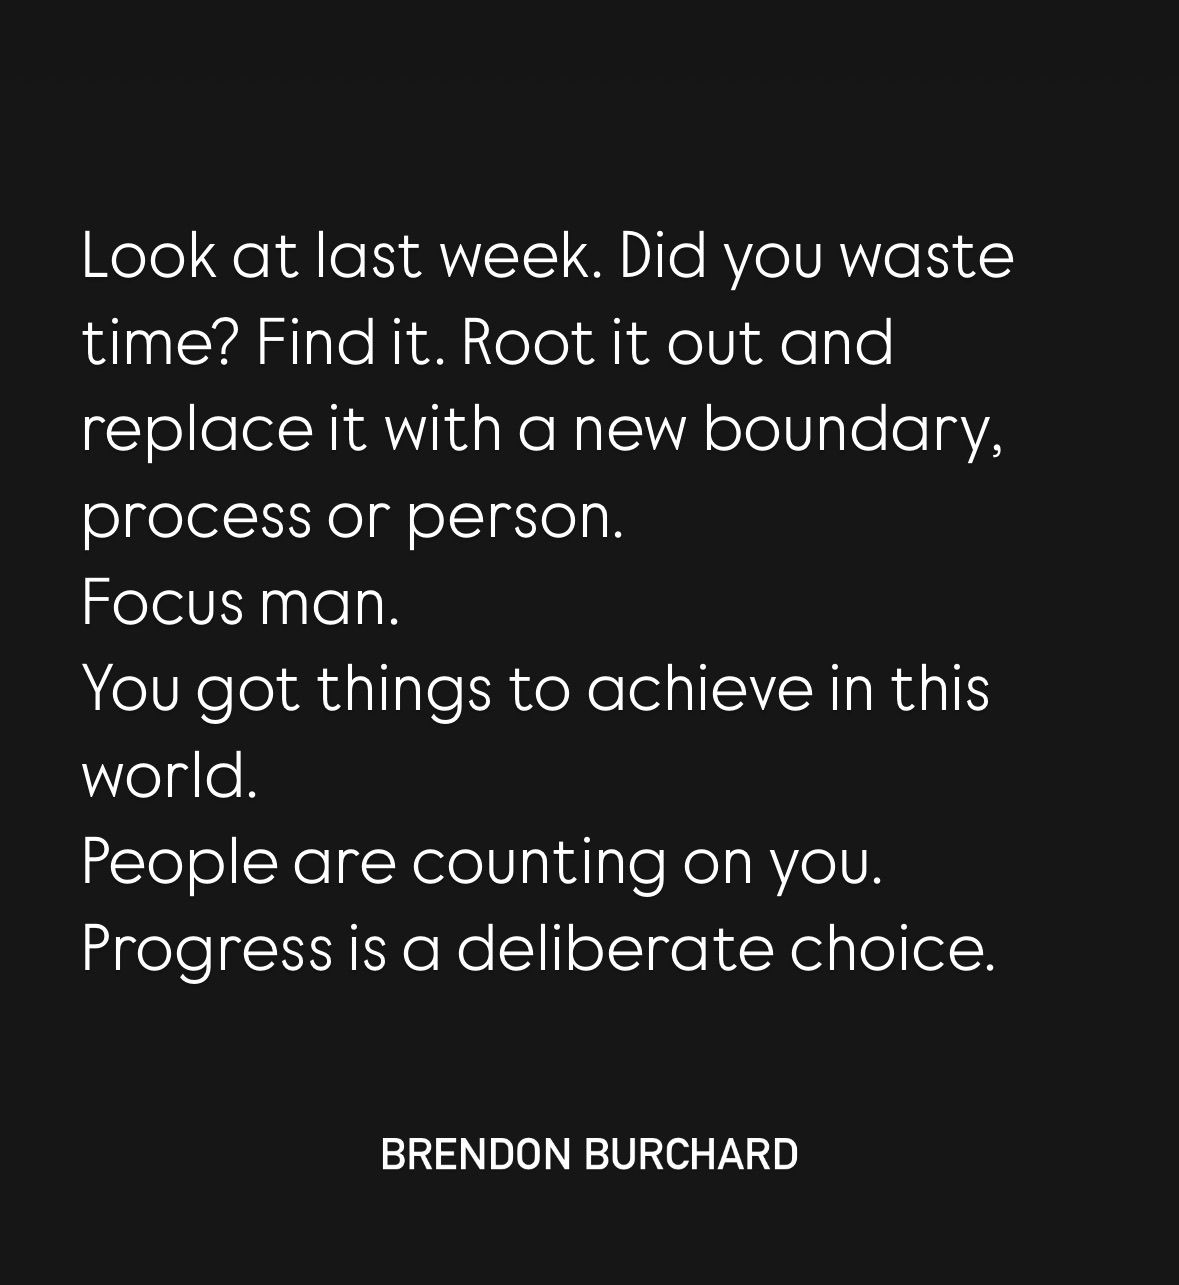 You have far more personal power than you realize. Take control of your life's agenda, focus, and be present. Be great.

Cheering you on! 🤍

Content Courtesy : Brendon Burchard 